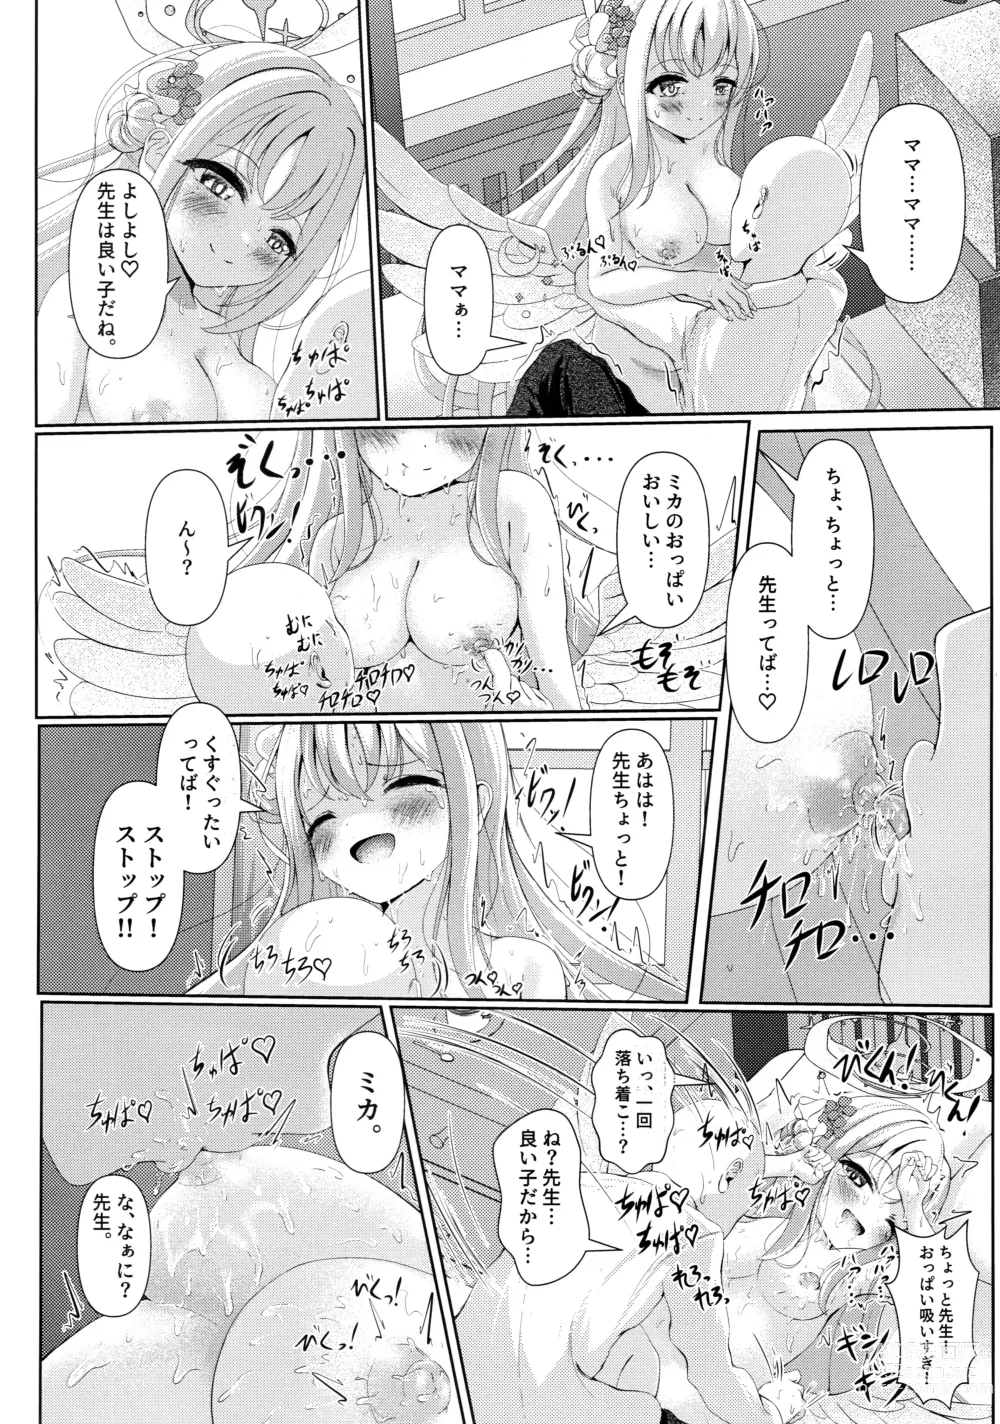 Page 11 of doujinshi Sleeping with the Dear Constellation.